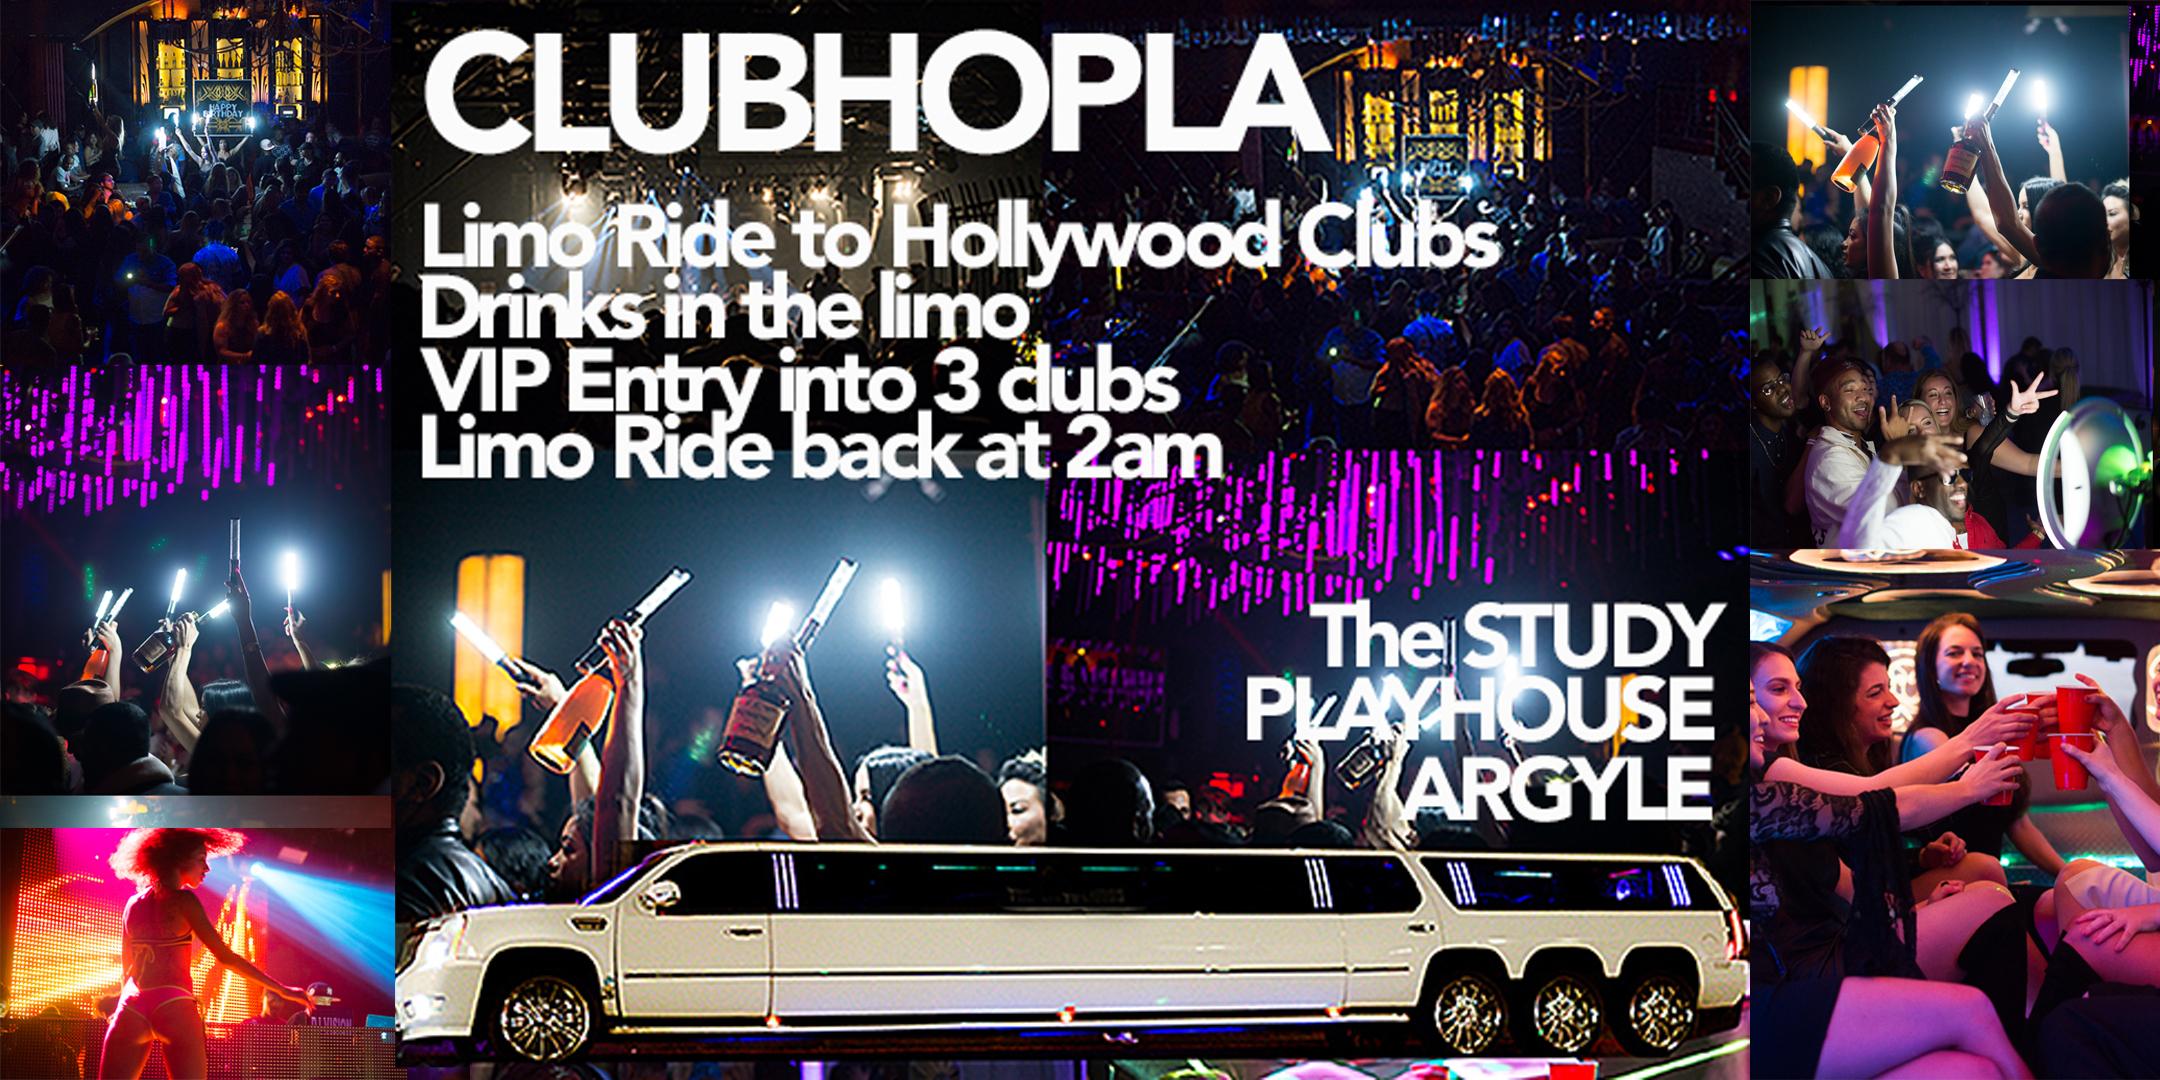 LIMO RIDE TO HOLLYWOOD CLUBS 